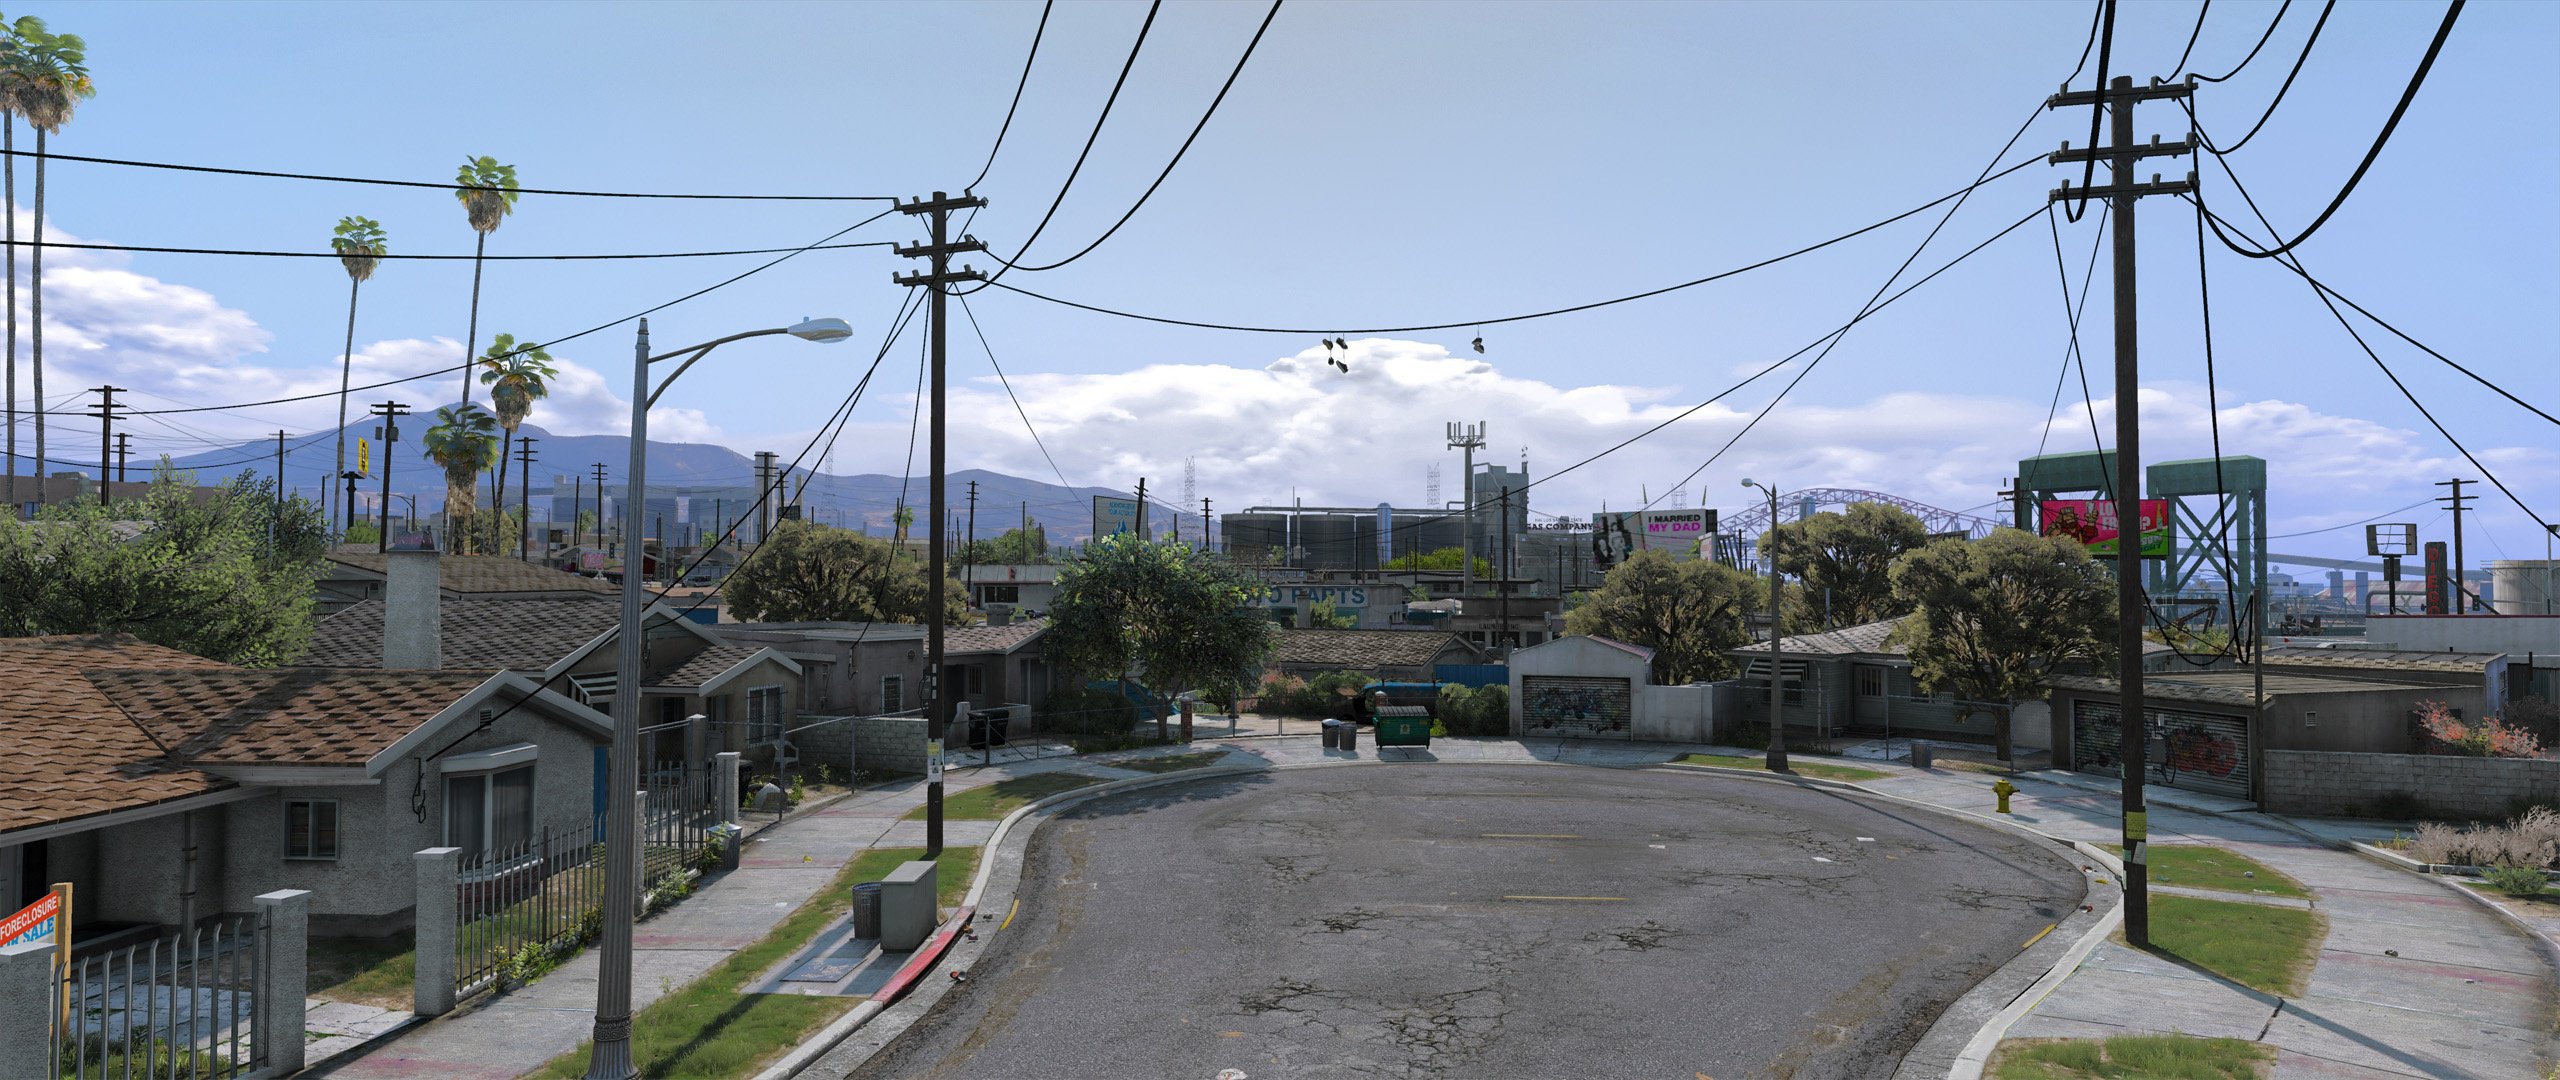 New GTA V Mod Pushes Photorealistic Graphics To the Next Level #10